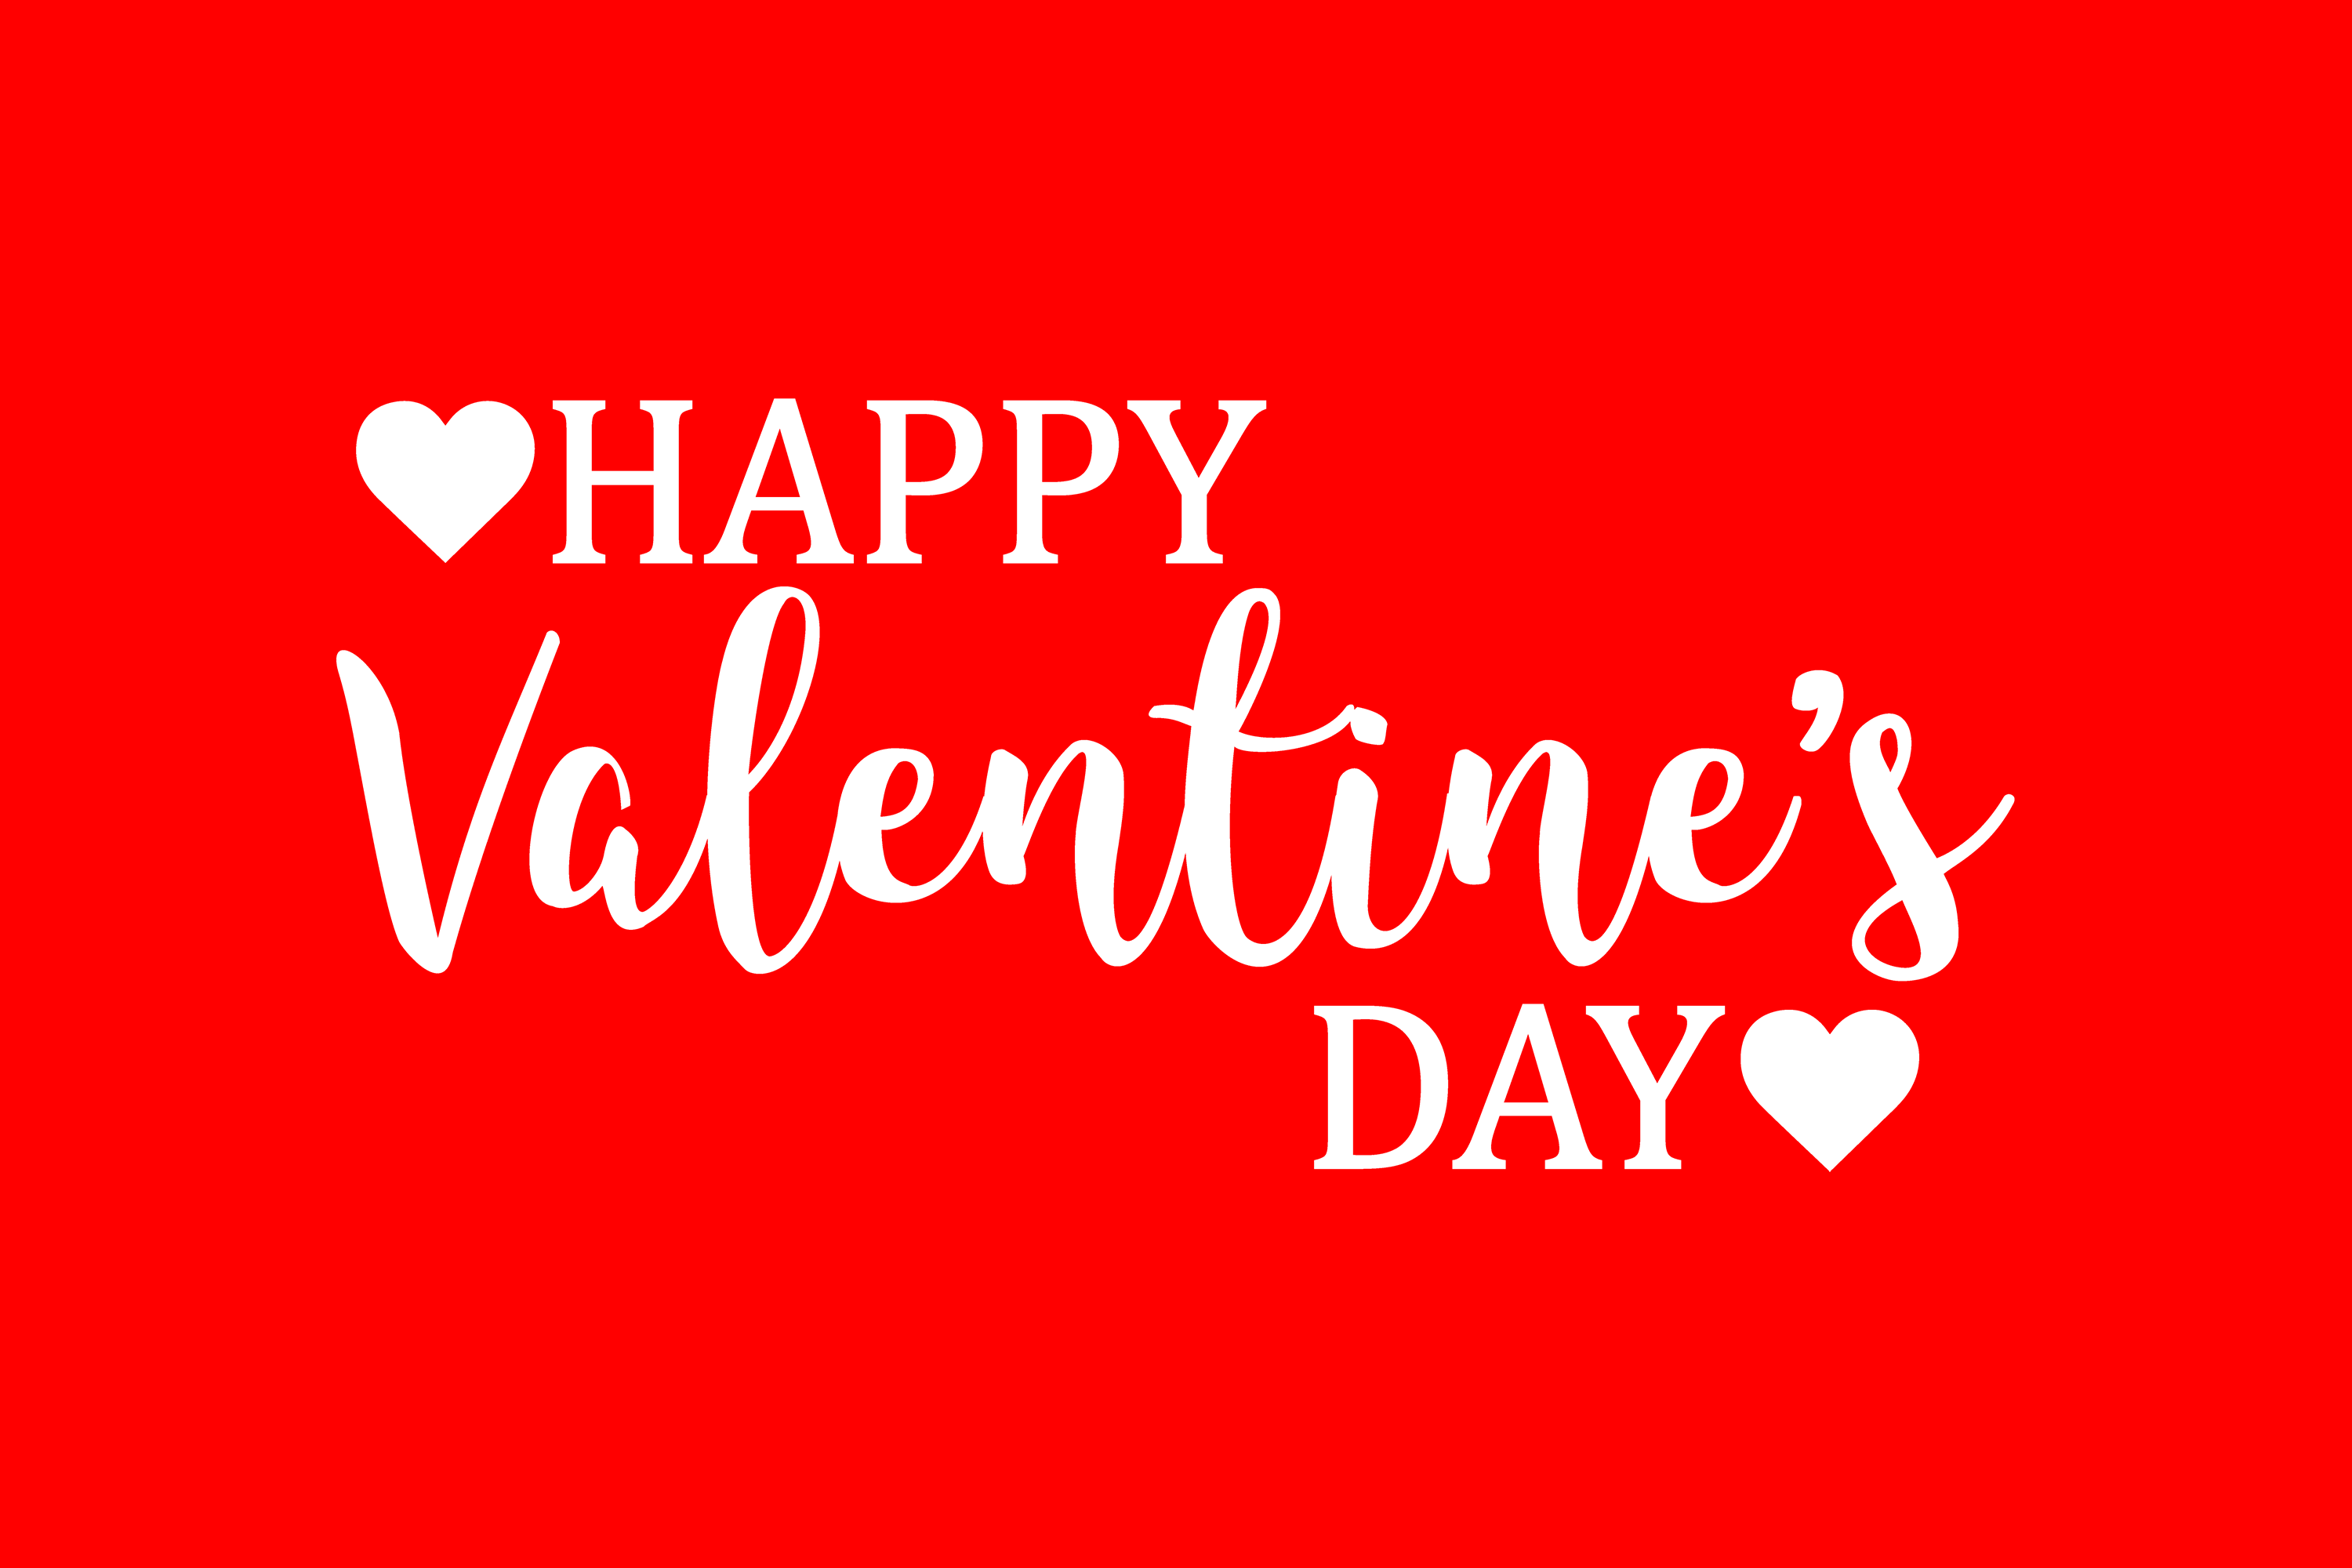 Valentine's Day Wallpapers: Happy Valentines Day 2021 Backgrounds